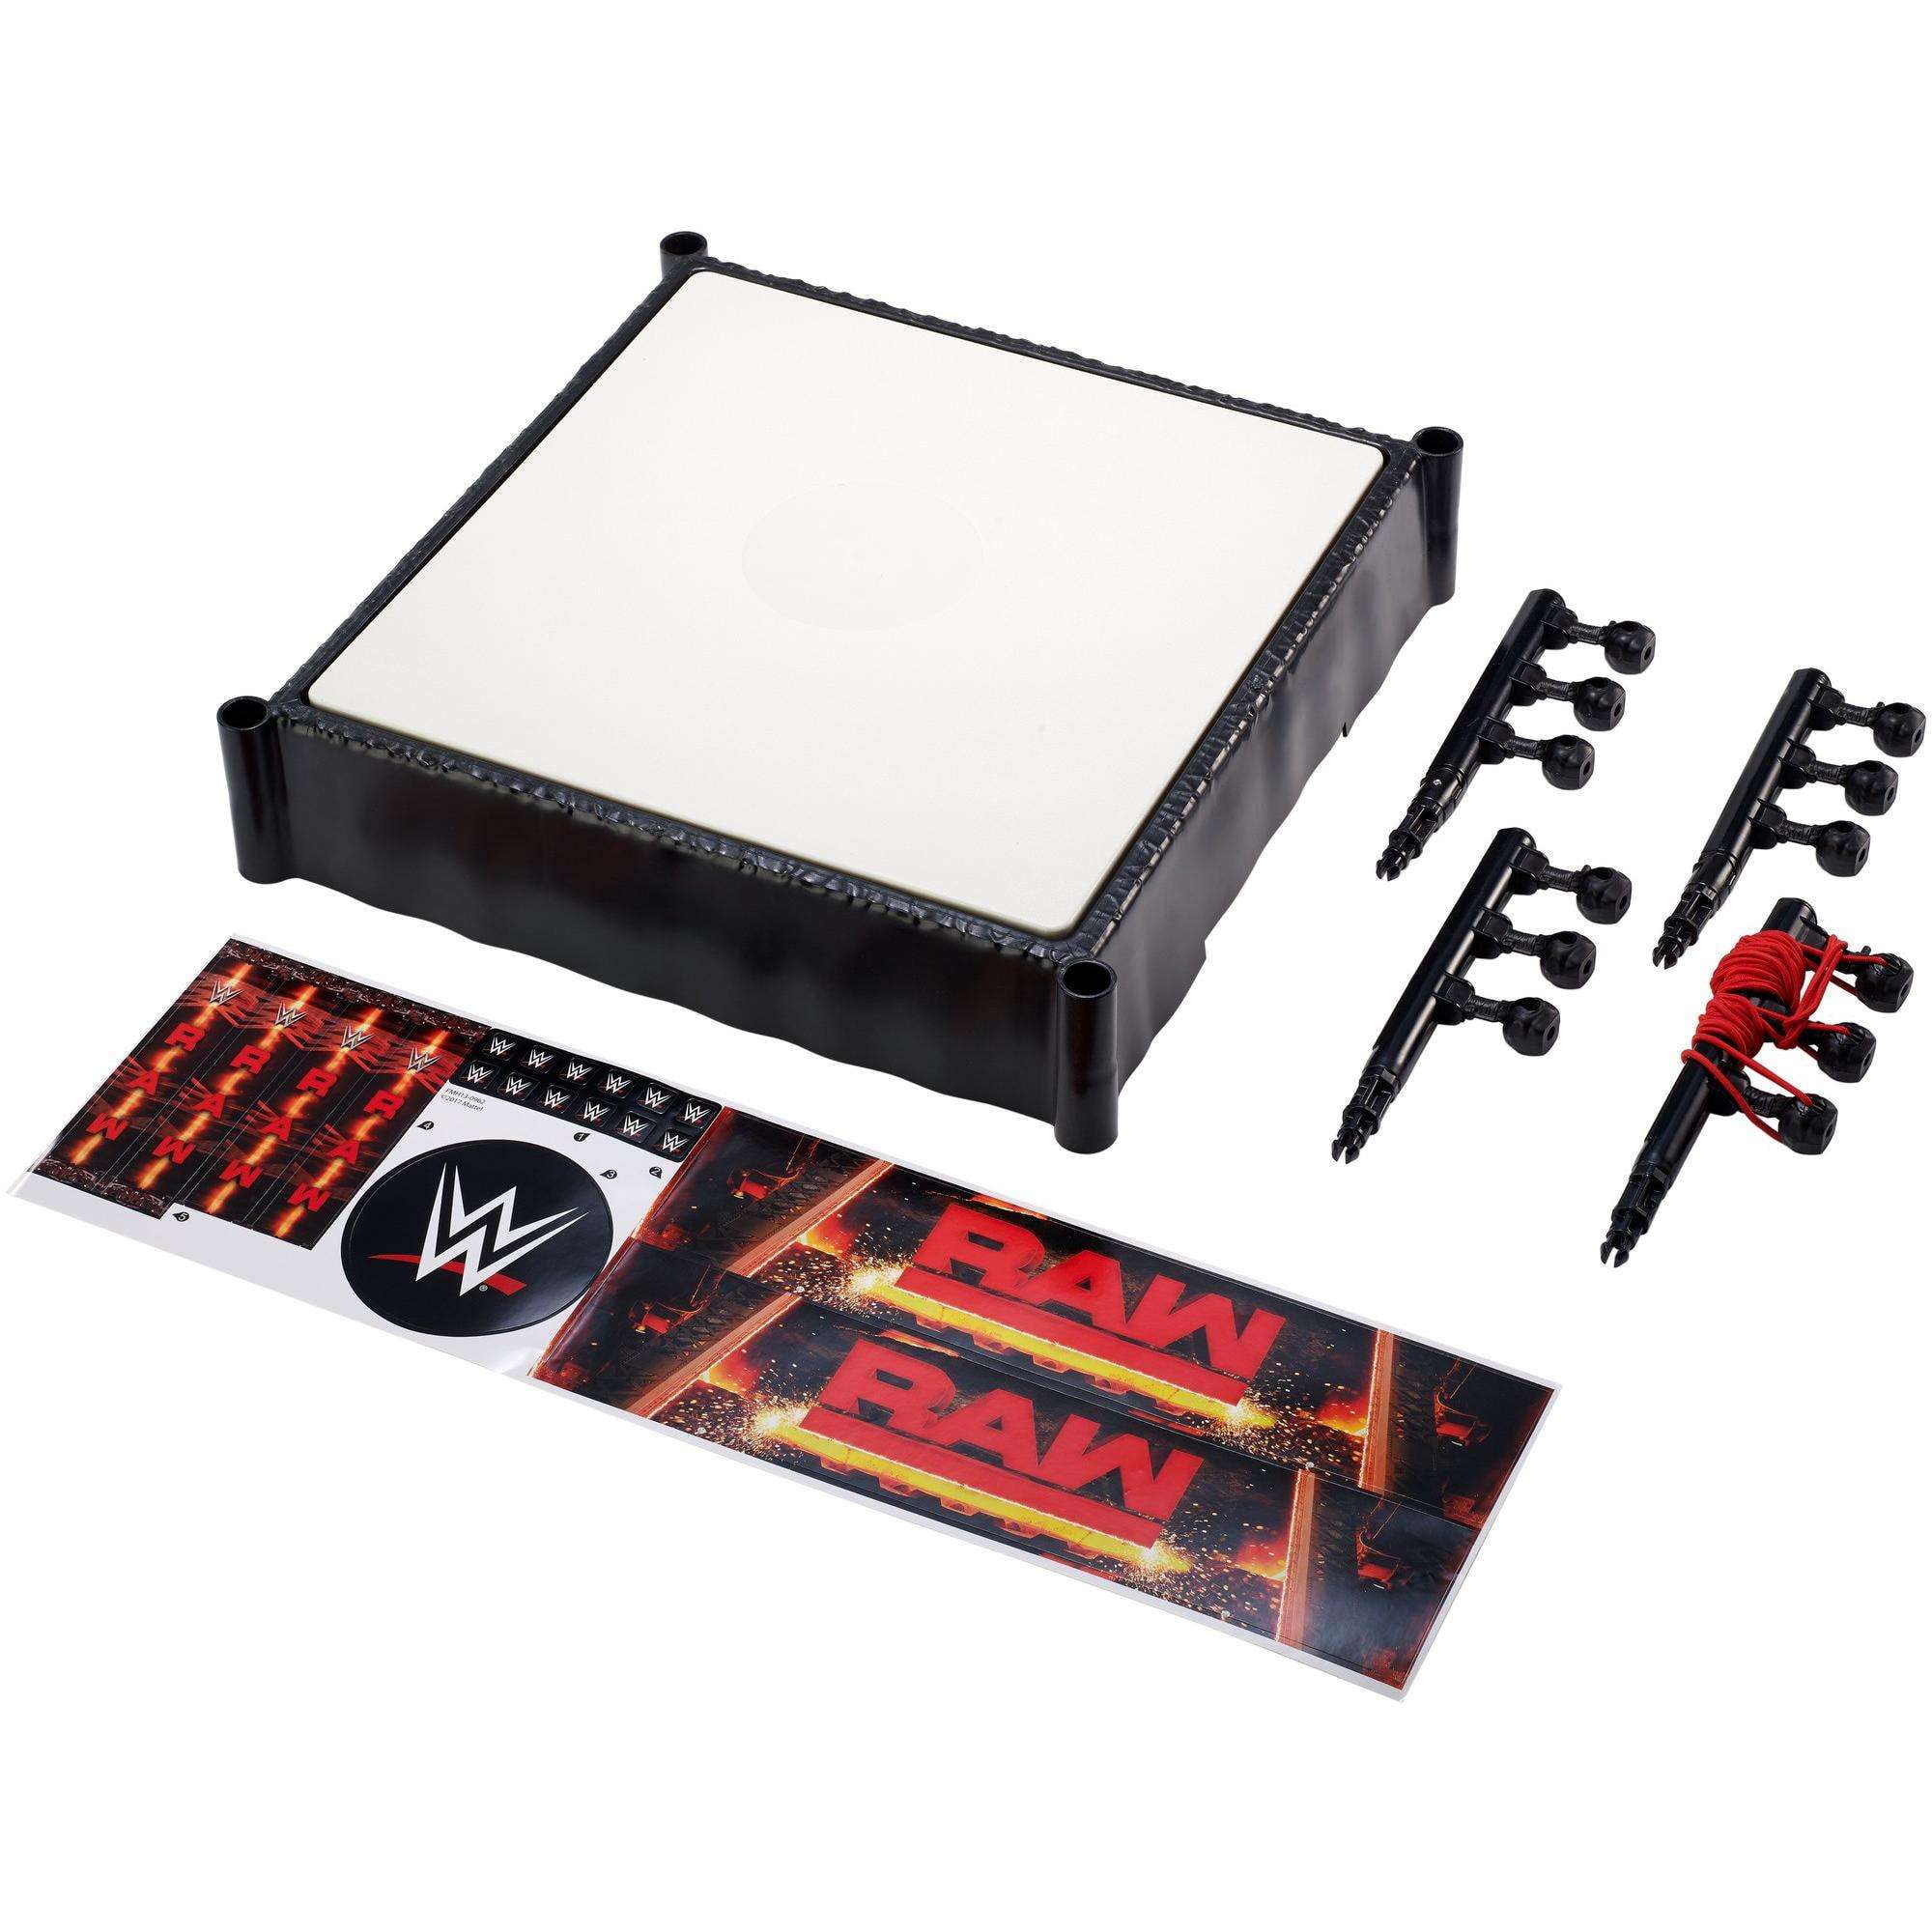 Complete with Pro-Tension Technology and Spring Loaded Mat Aprrox 14 RAW collector WWE Superstar Wrestling Ring 